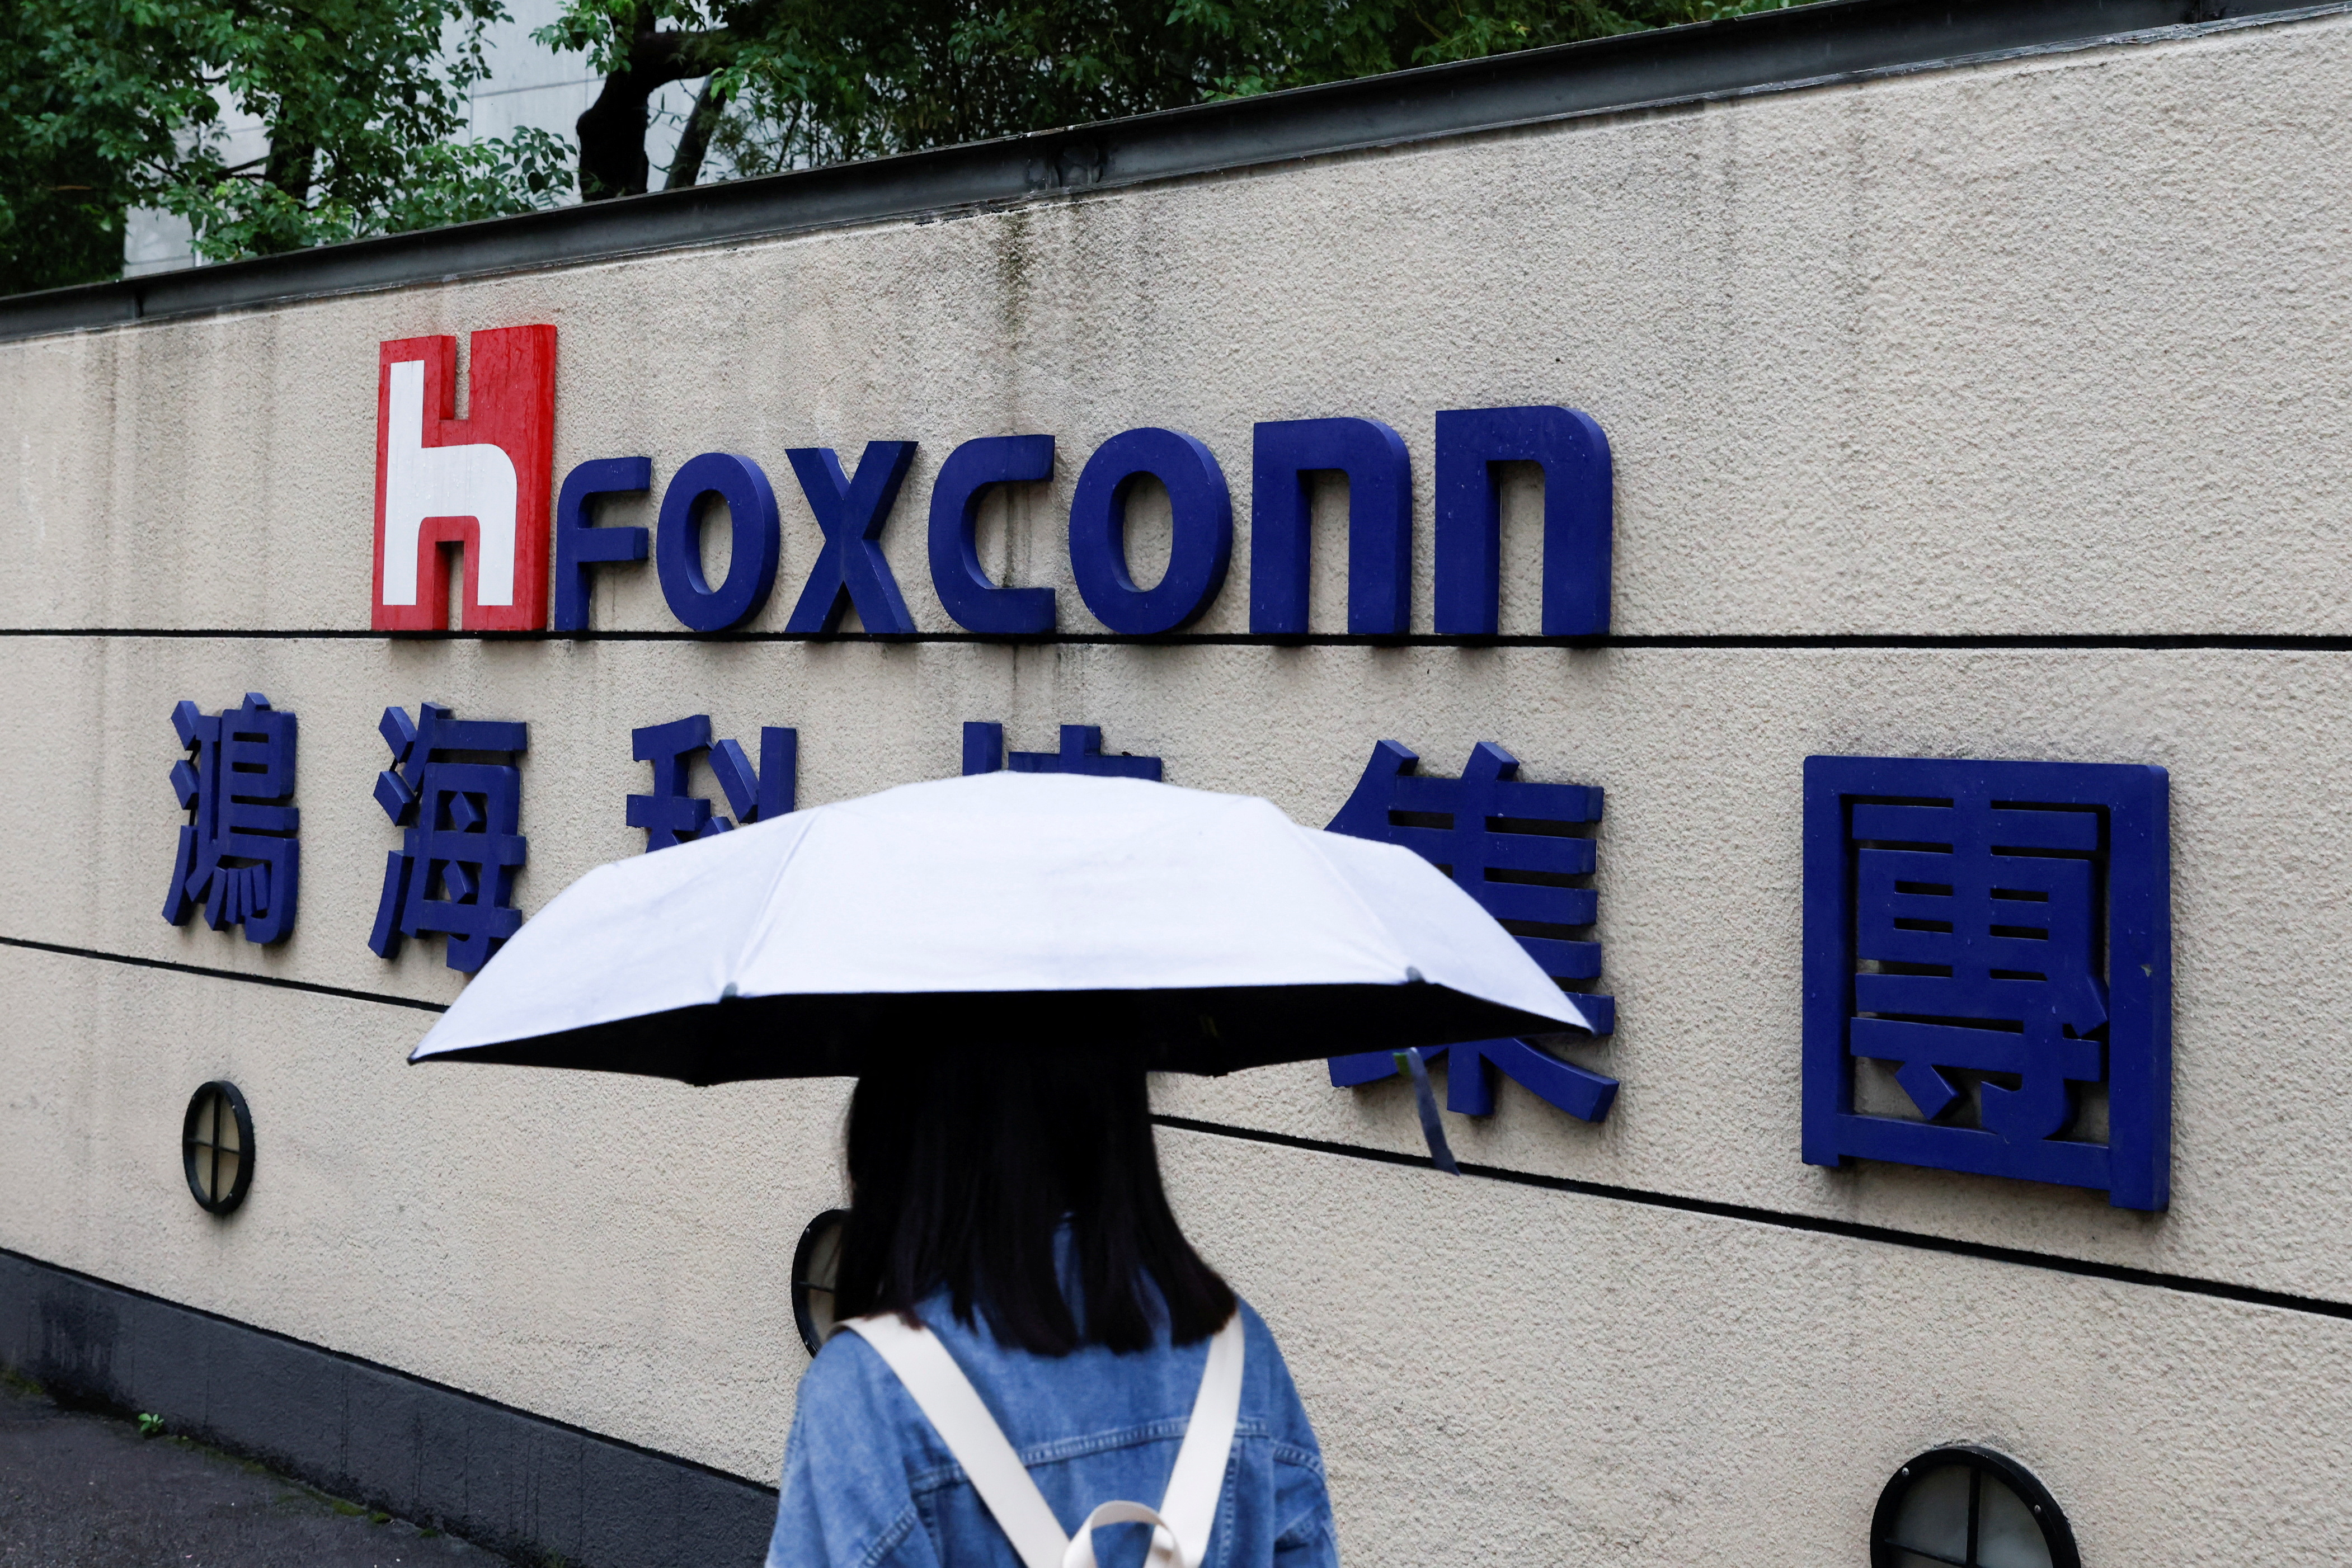 A woman carrying an umbrella walks past the logo of Foxconn outside a company's building in Taipei